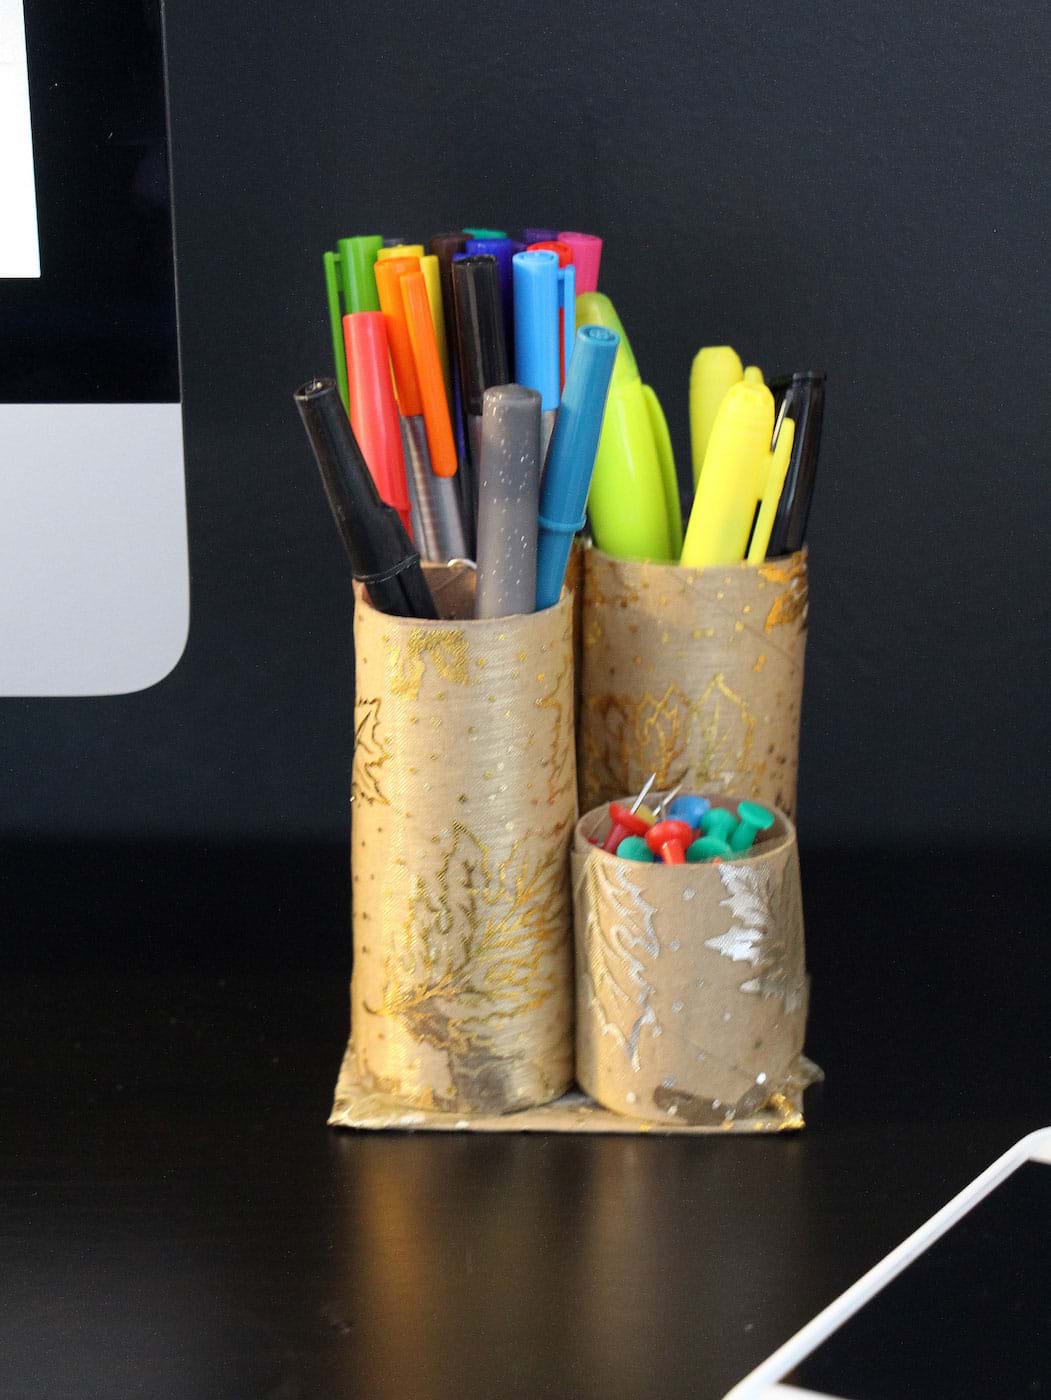 Desk organizer made with toilet paper roll crafts